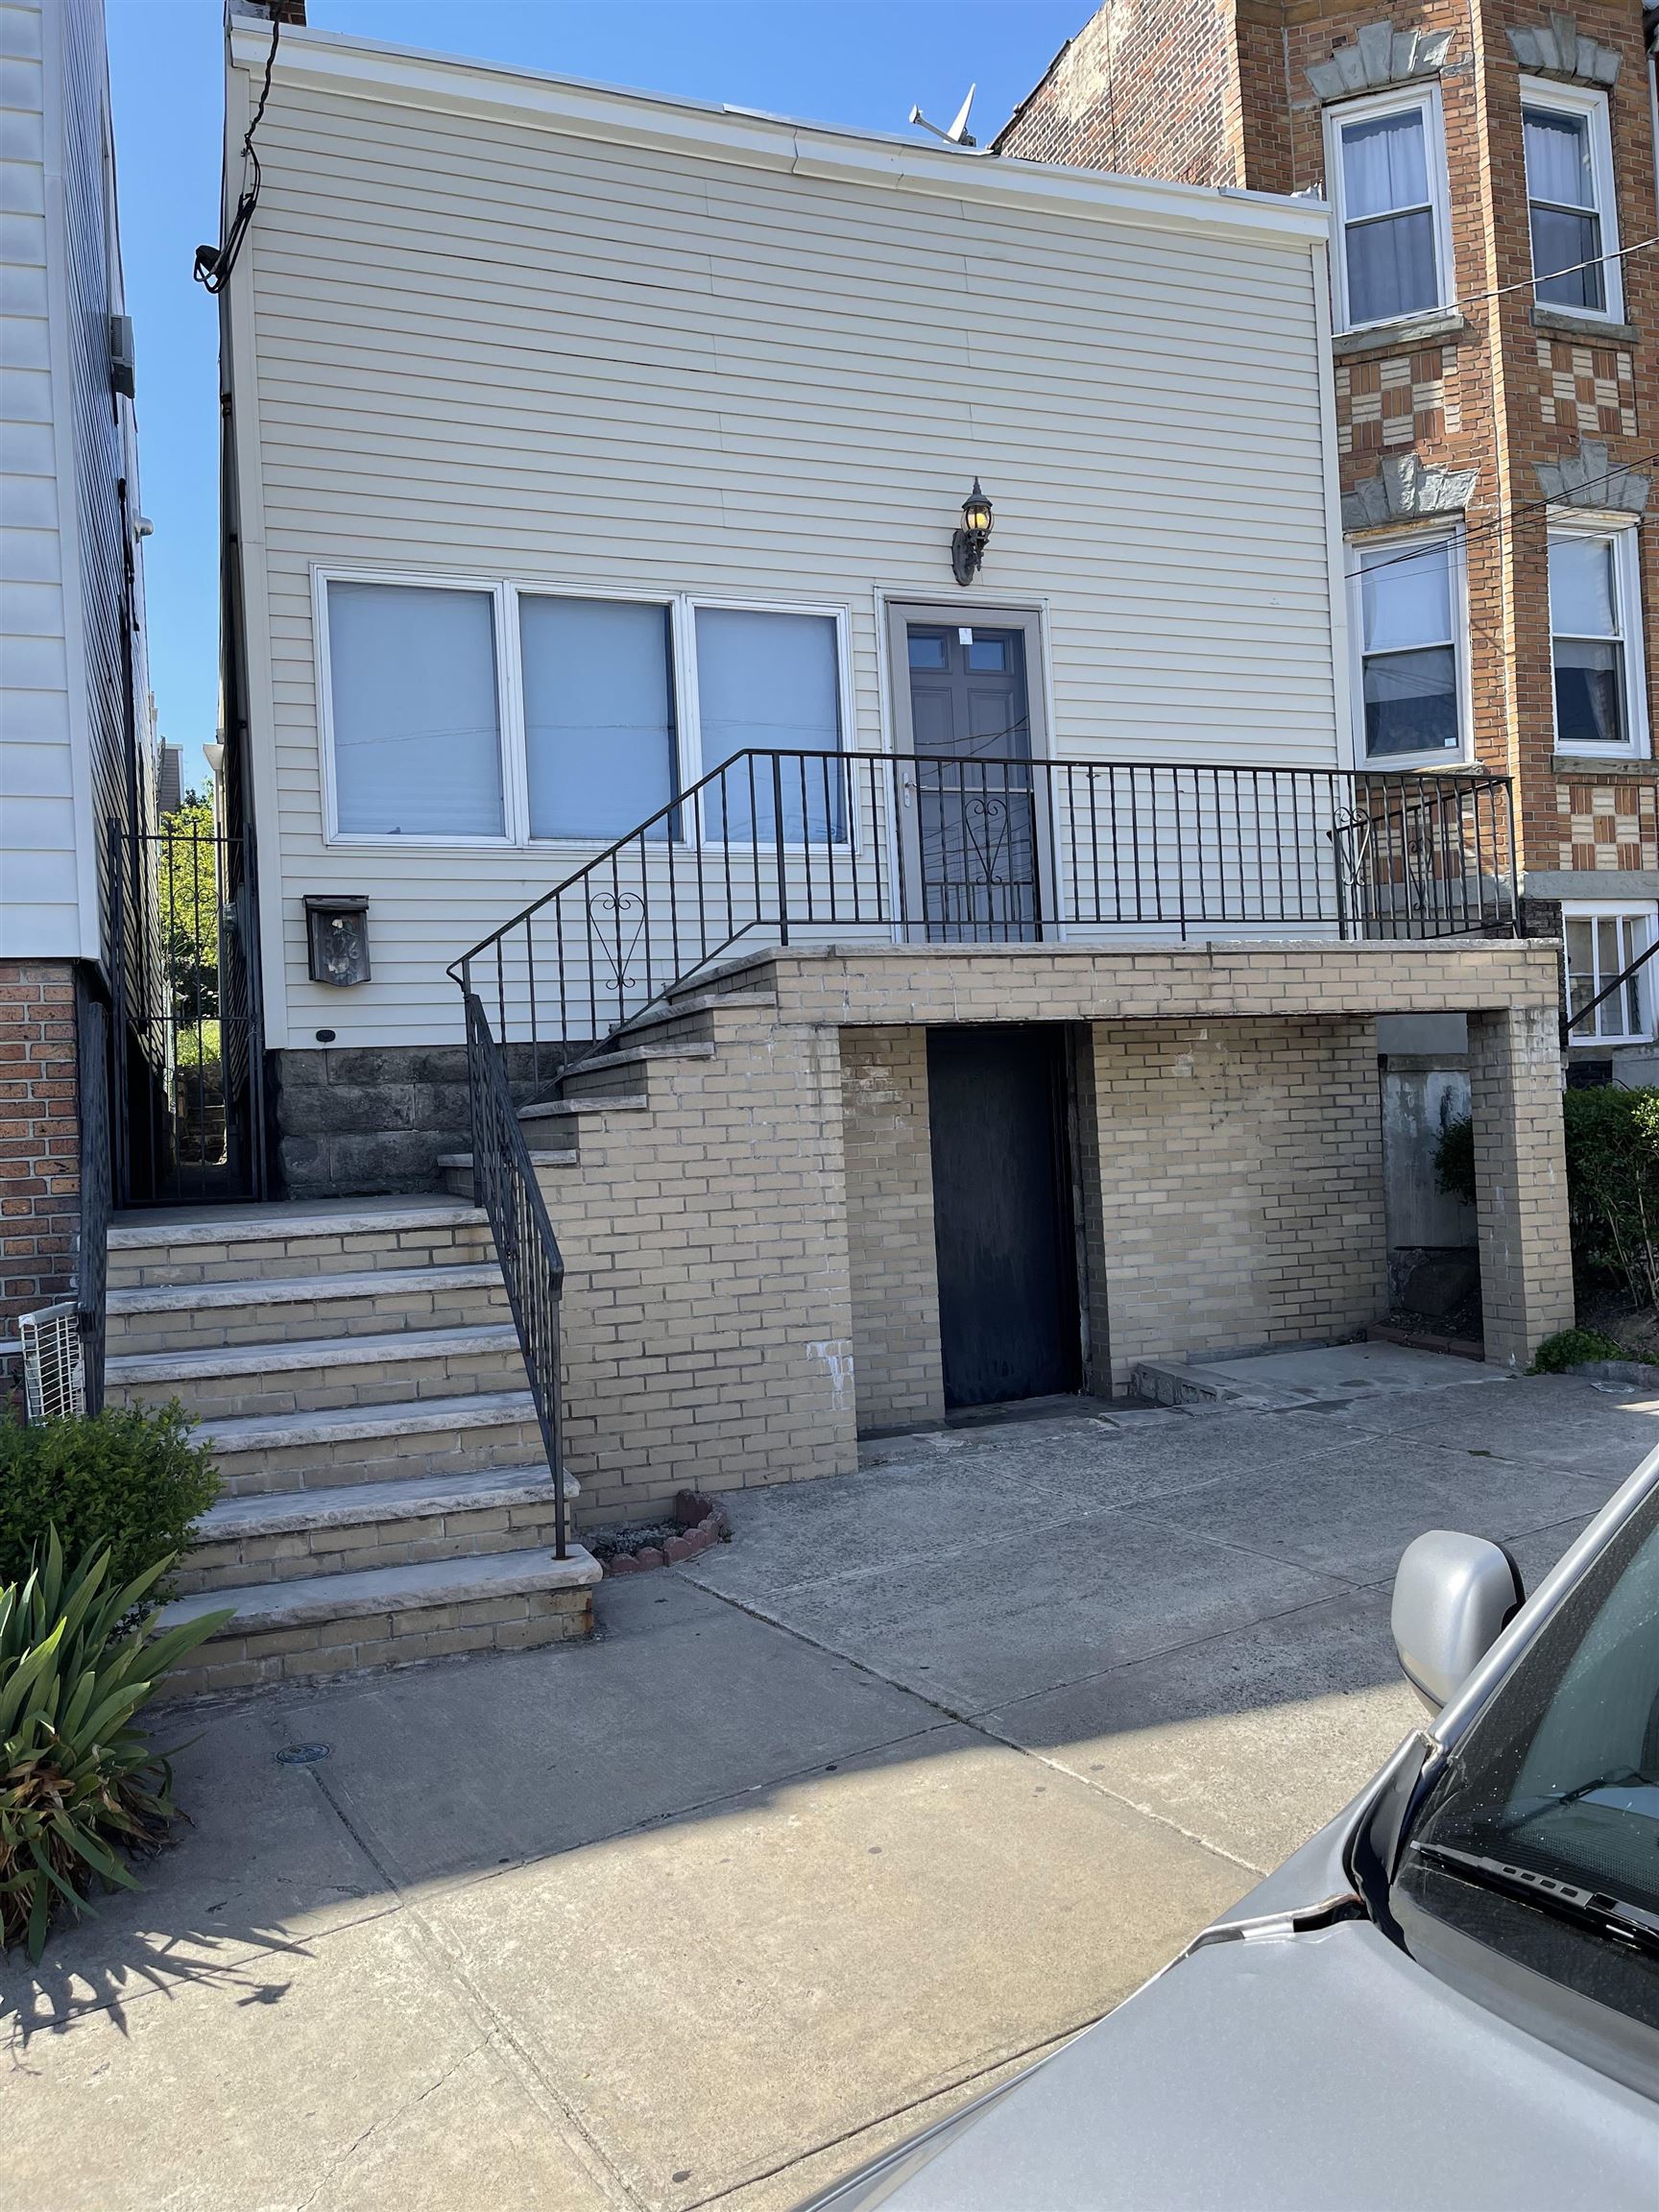 326 PATERSON PLANK RD, JC, Heights, NJ 07307